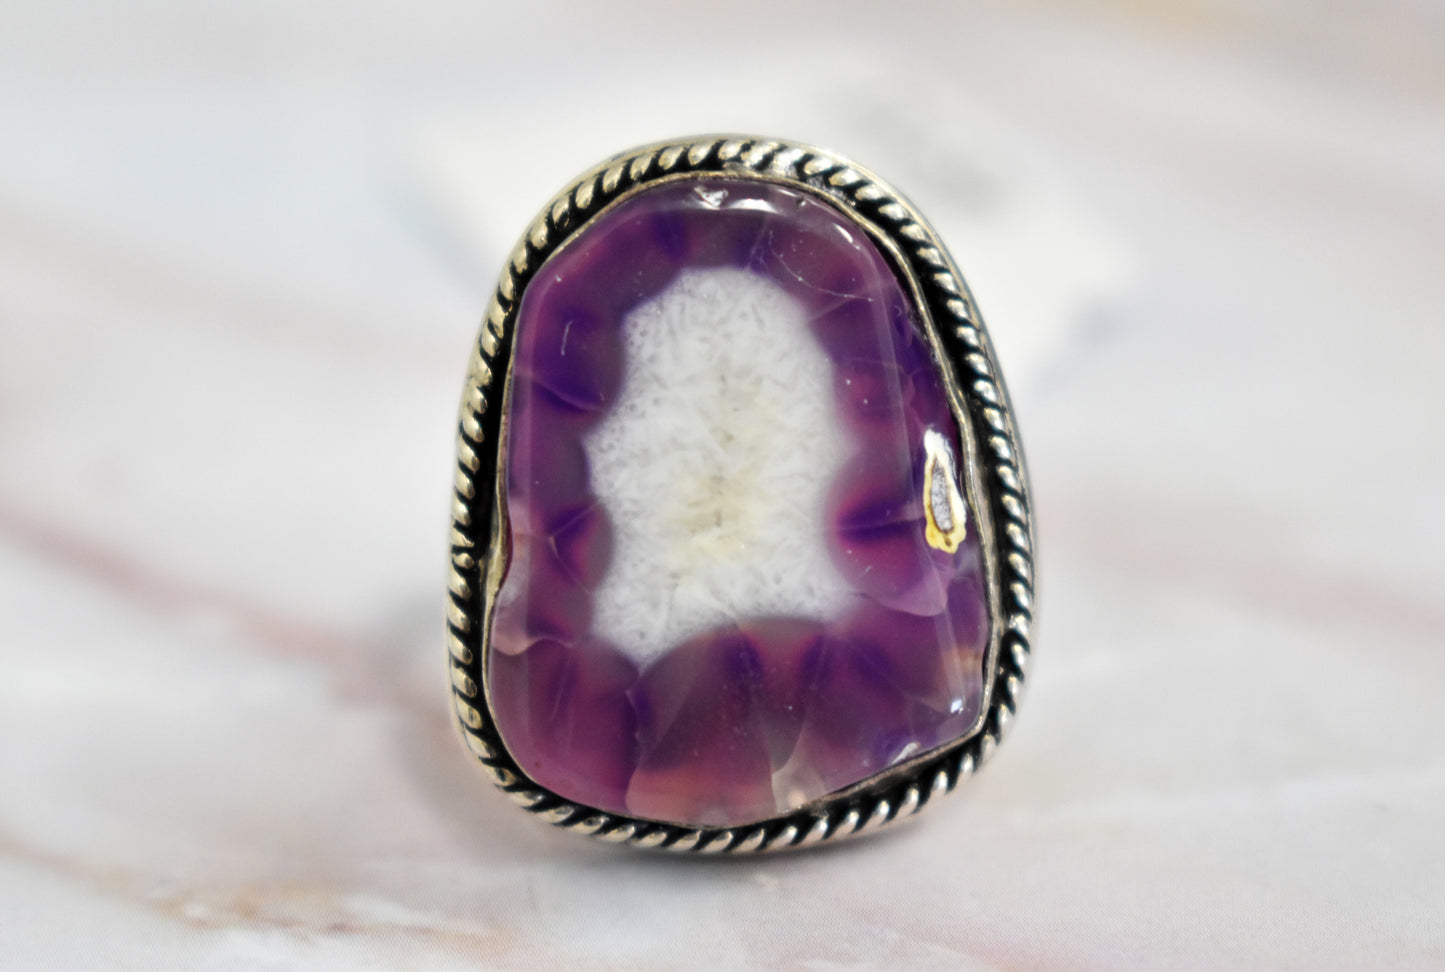 stones-of-transformation - Purple Agate Geode (Size 7.5) - Stones of Transformation - 